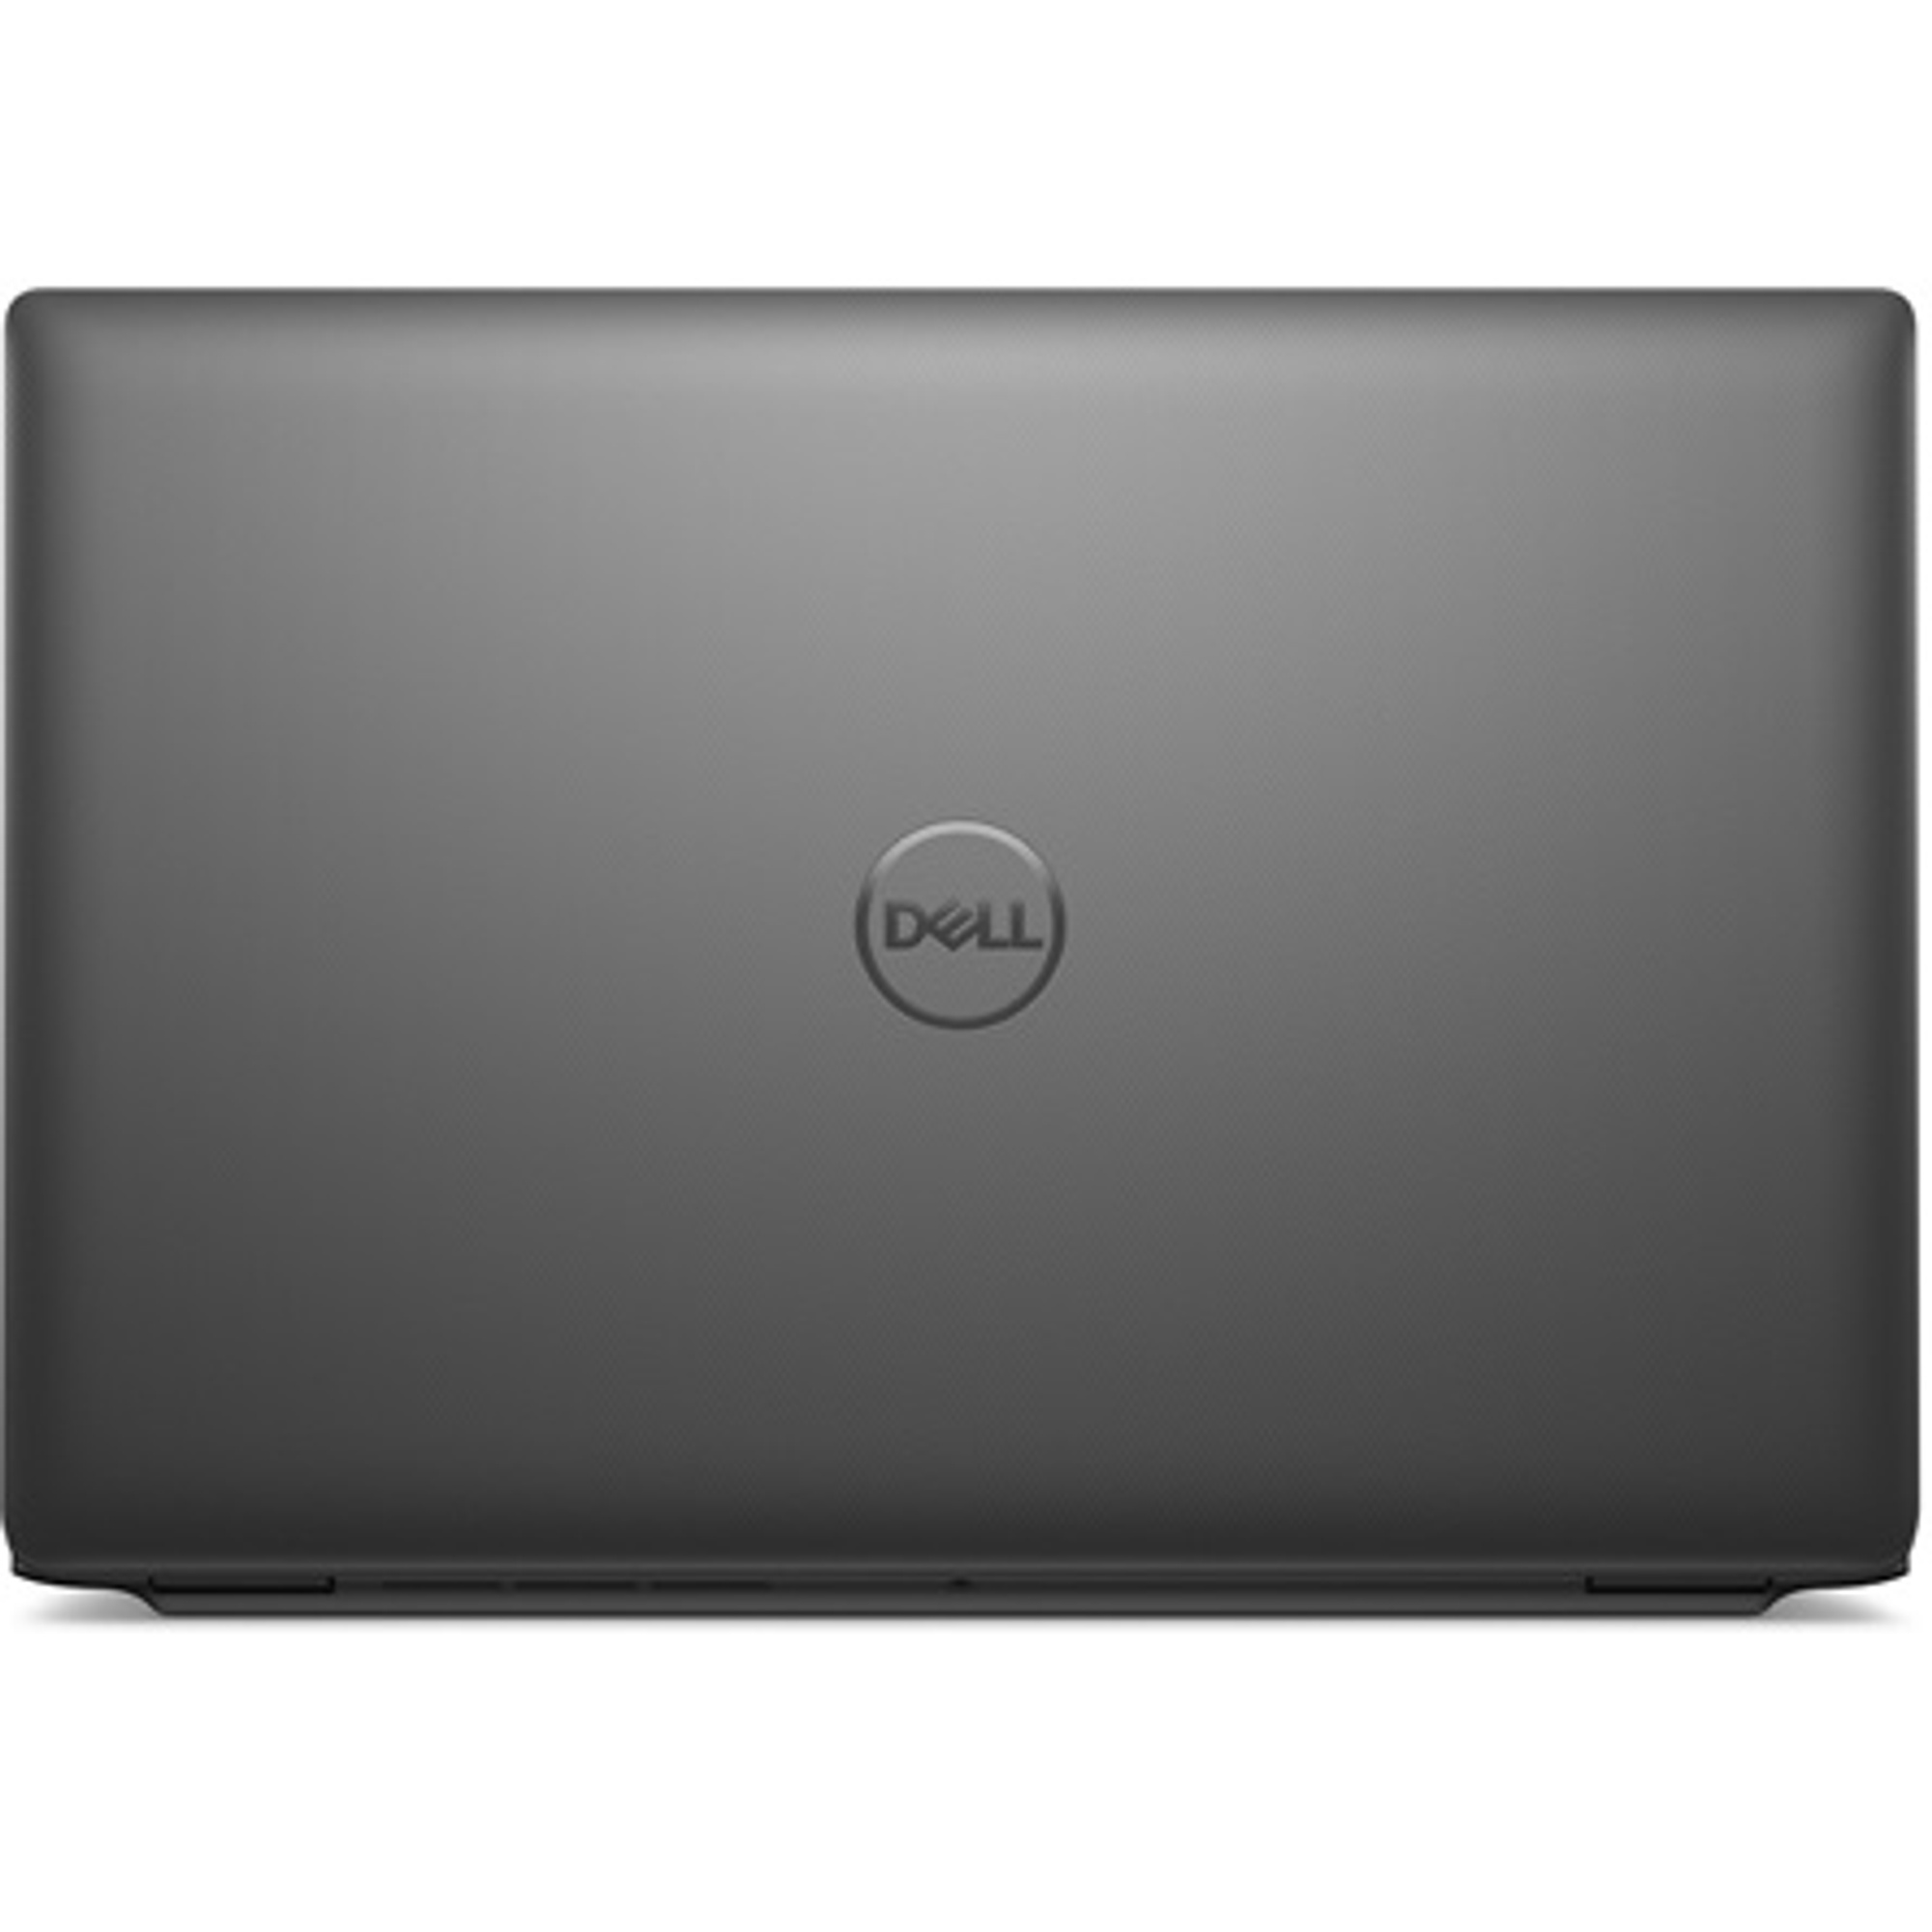 DELL L3440-8 Laptop / Notebook 7